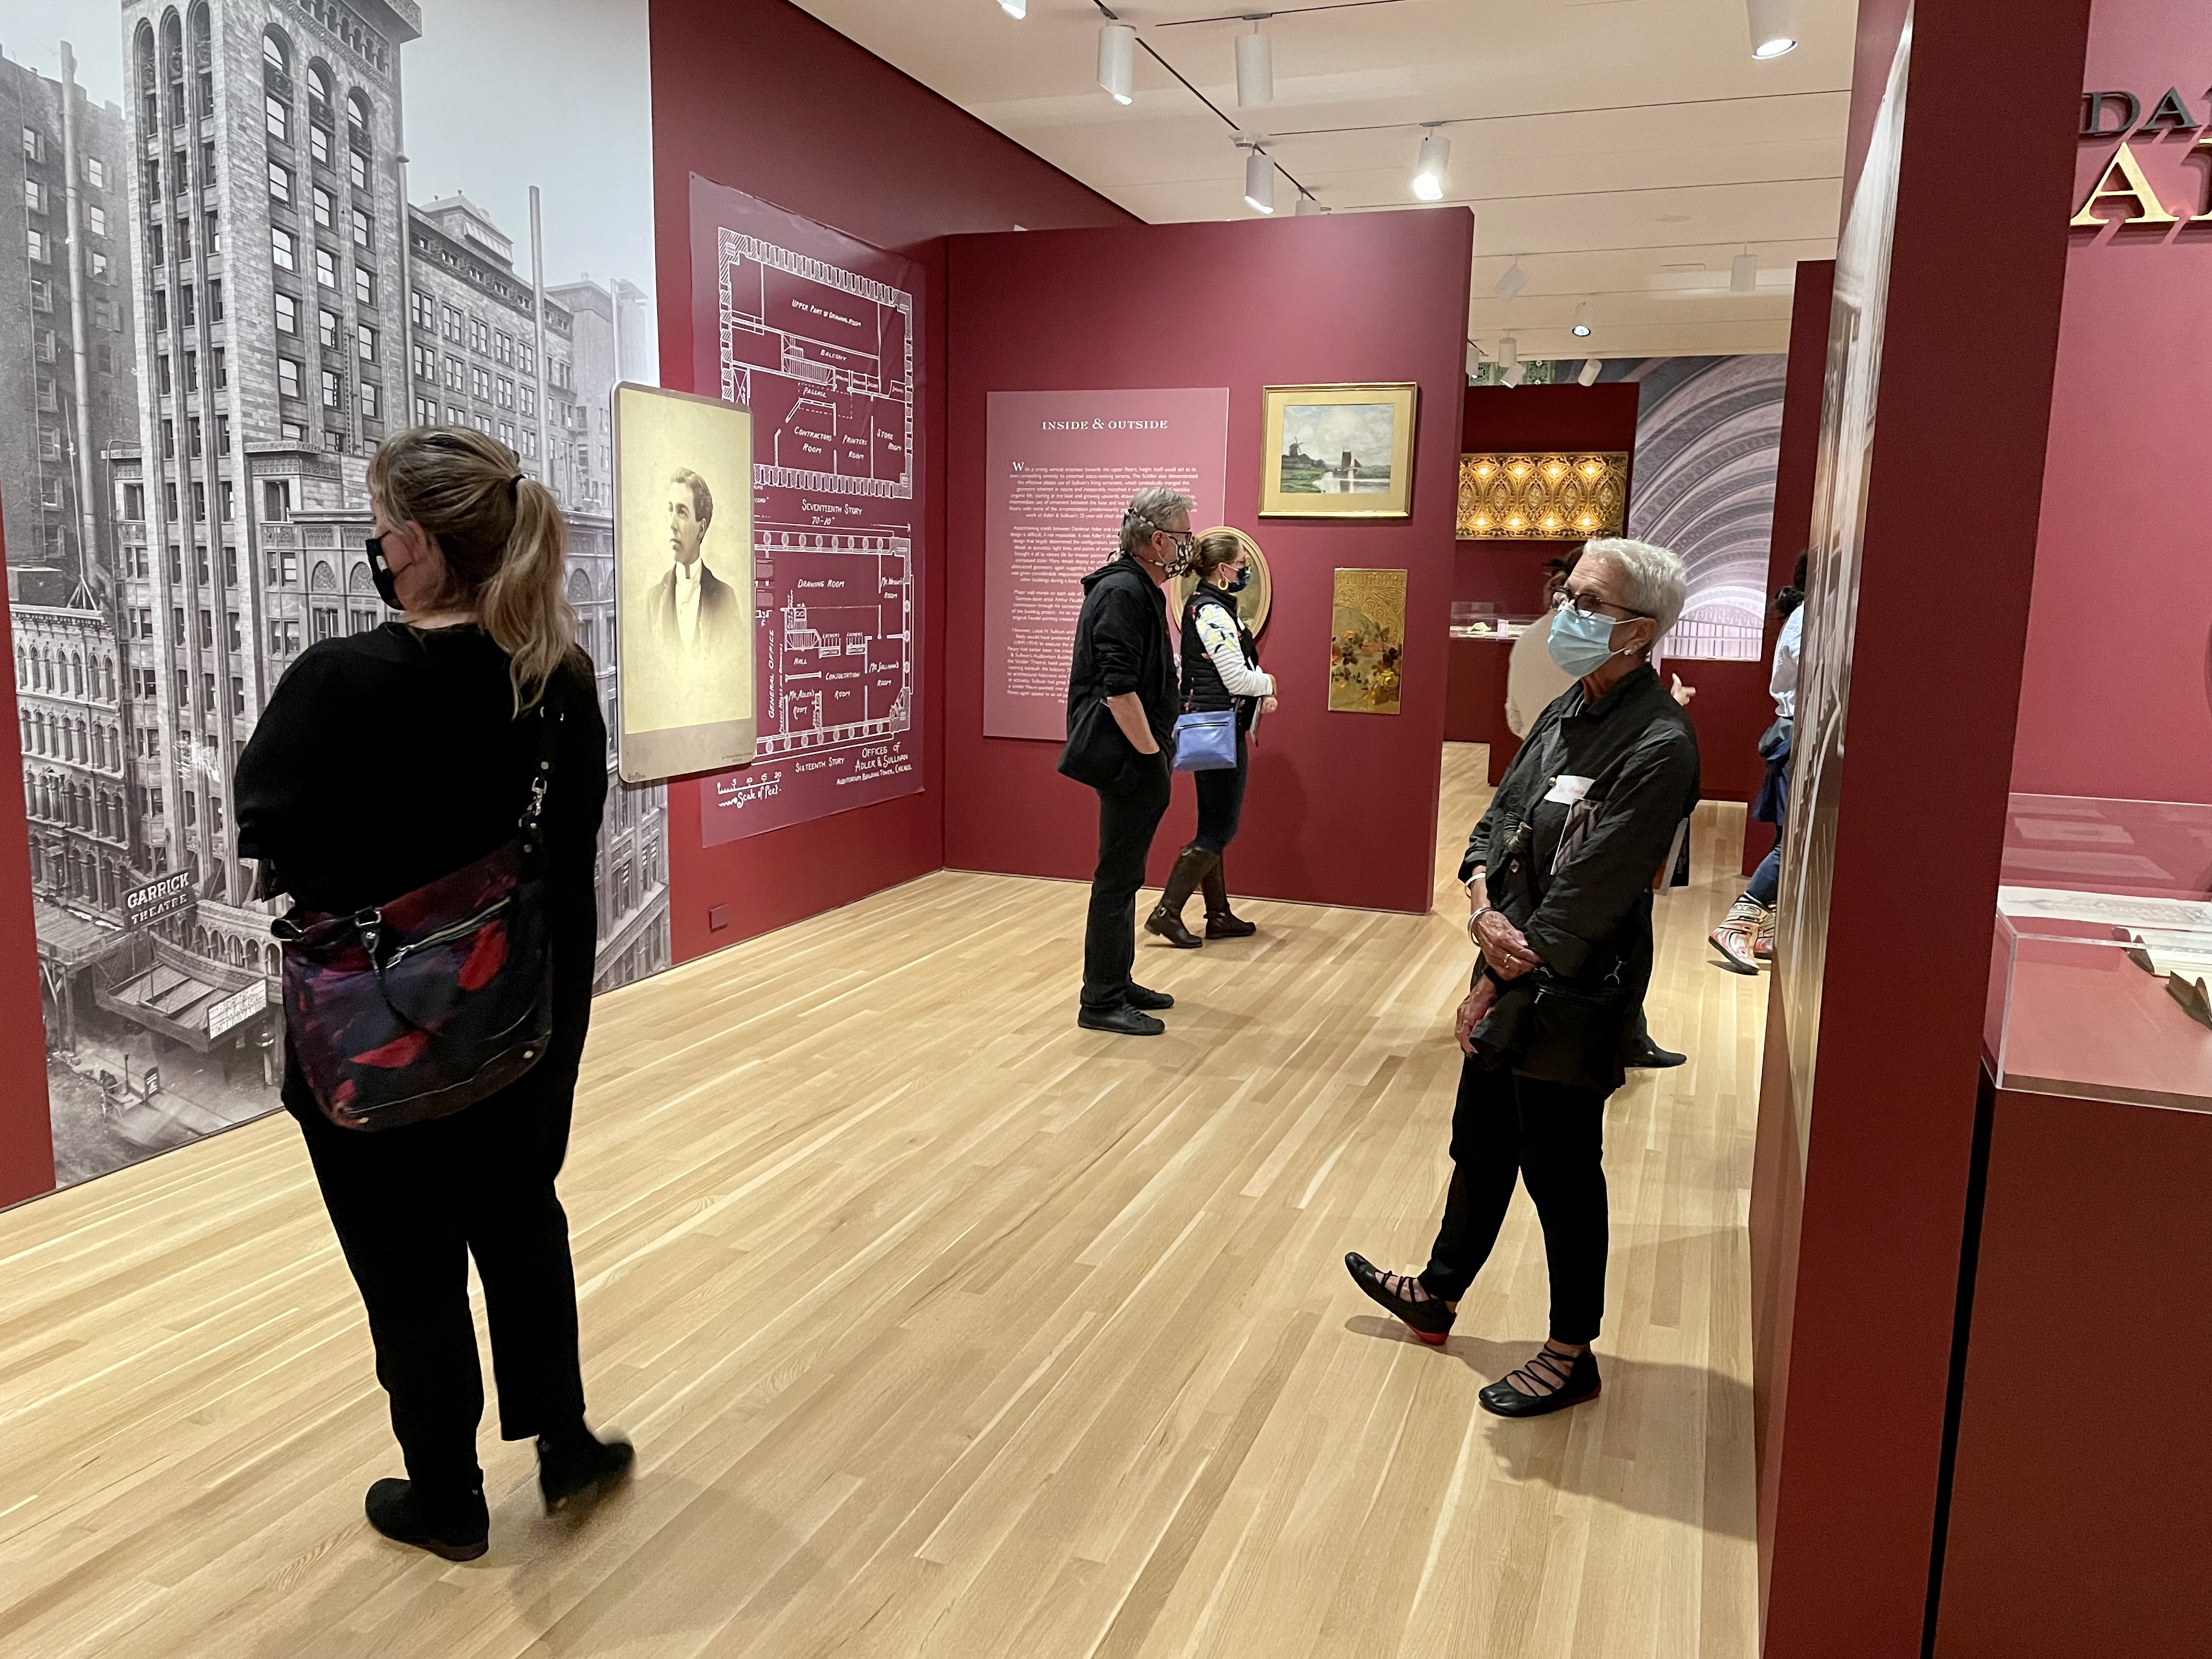 Six people standing in an art gallery with red walls and looking at black and white photographs of architecture